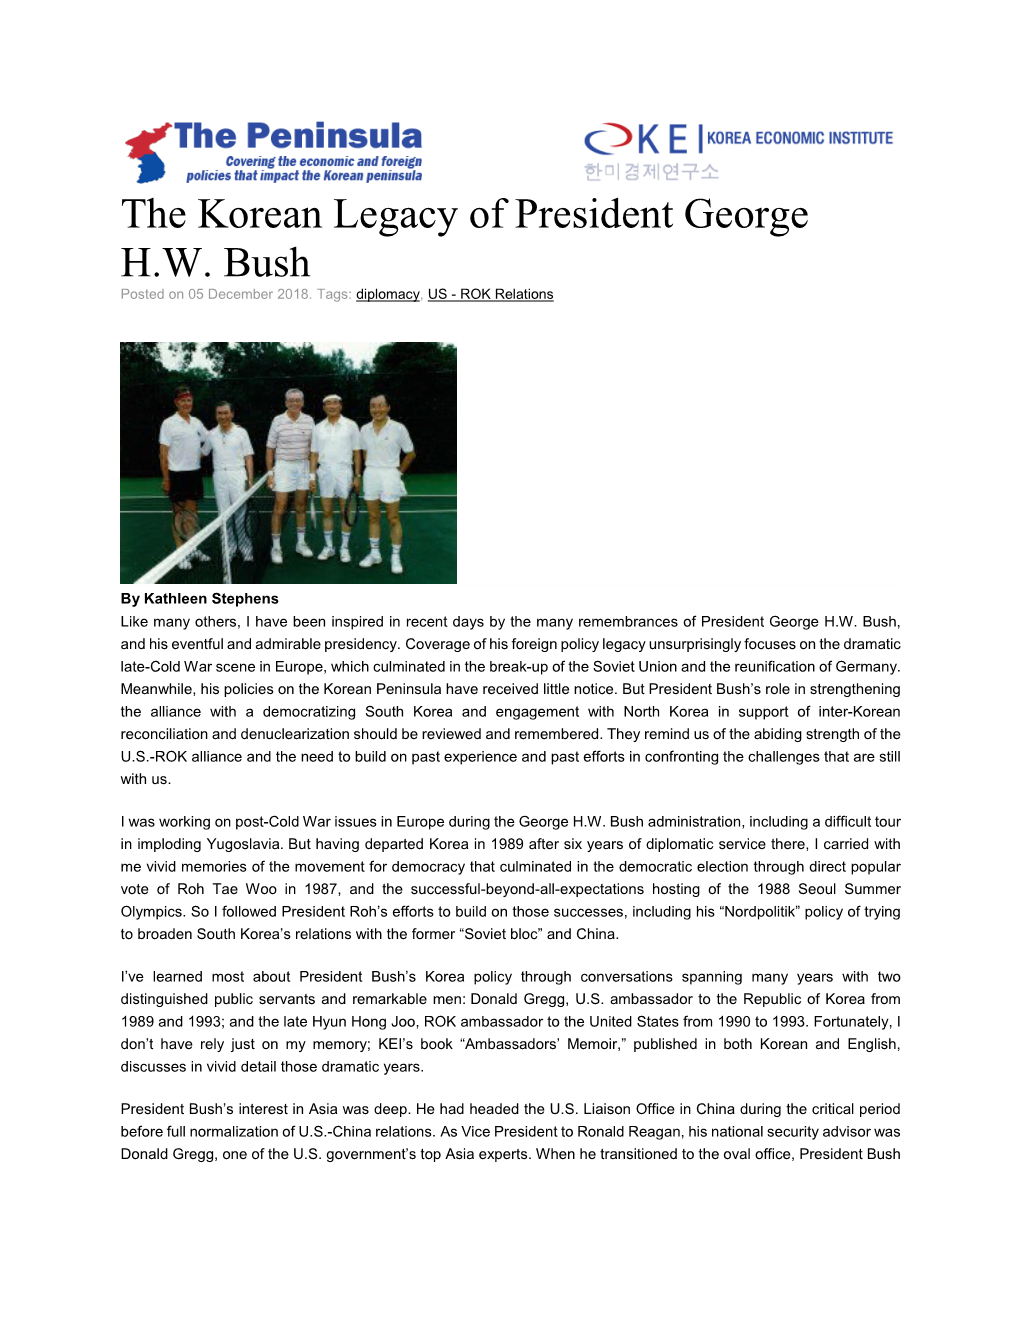 The Korean Legacy of President George H.W. Bush Posted on 05 December 2018